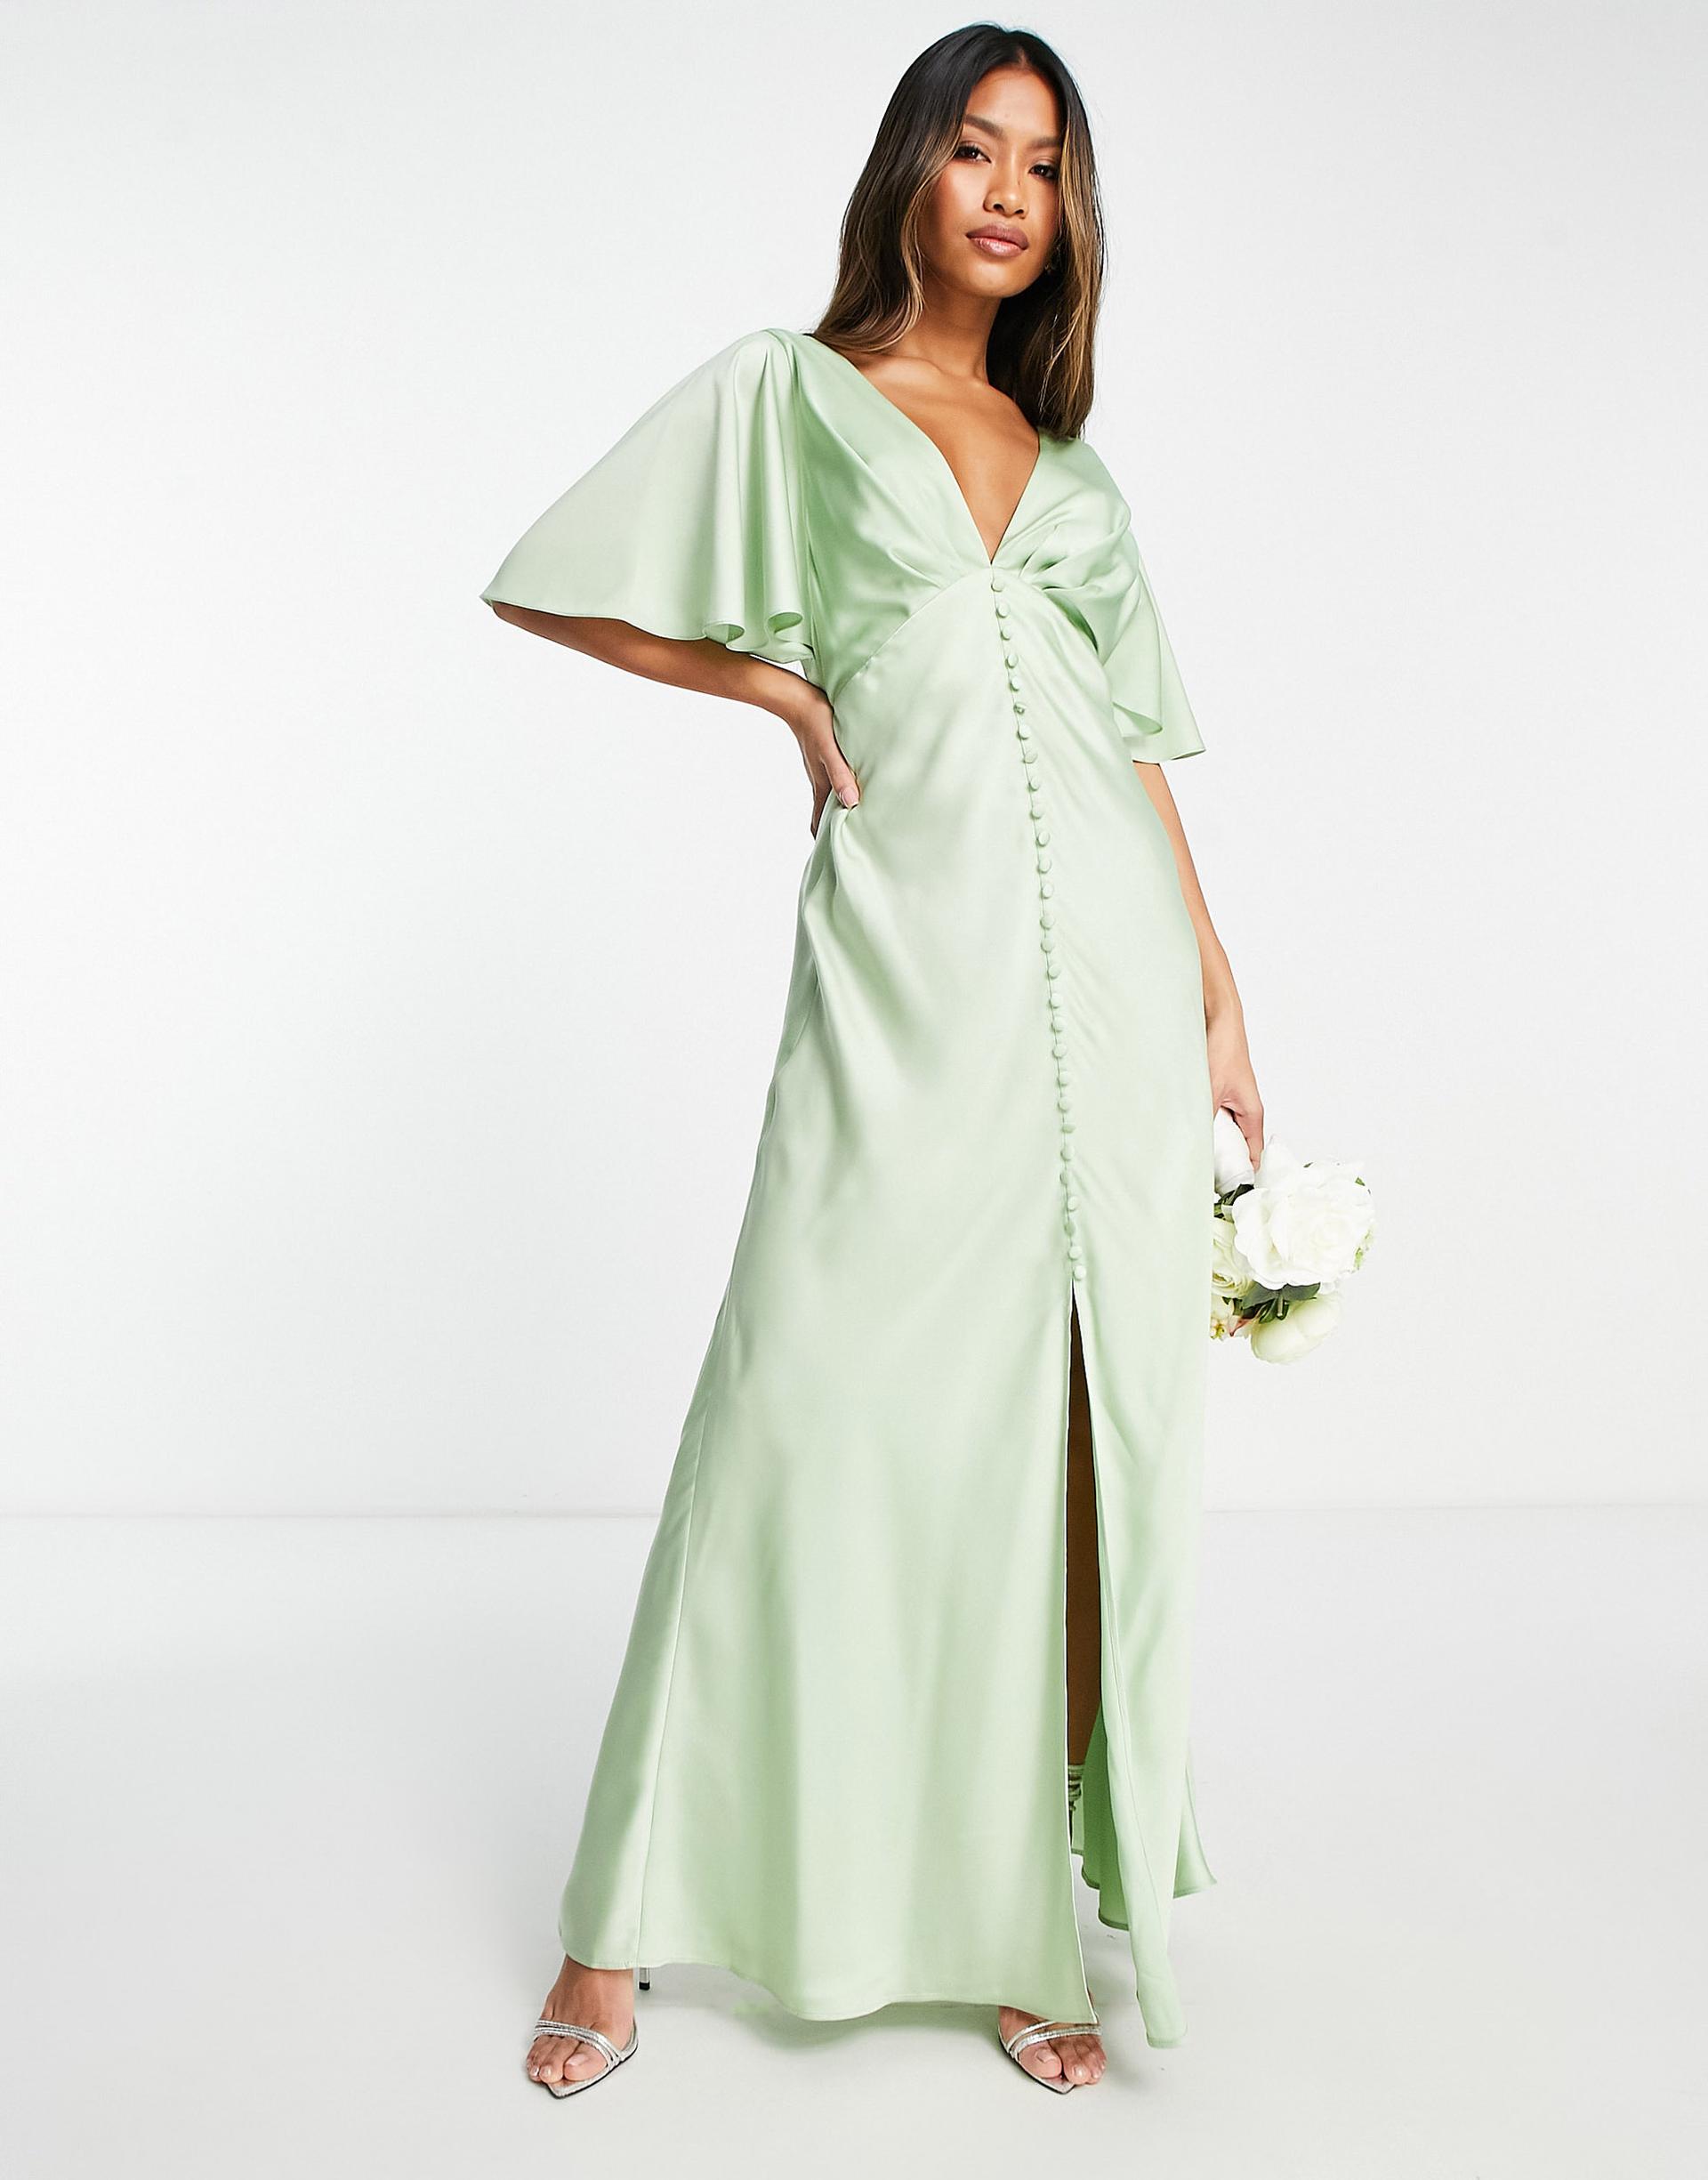 26 Satin Bridesmaids Dresses That Your Girls Will Adore - hitched.co.uk ...